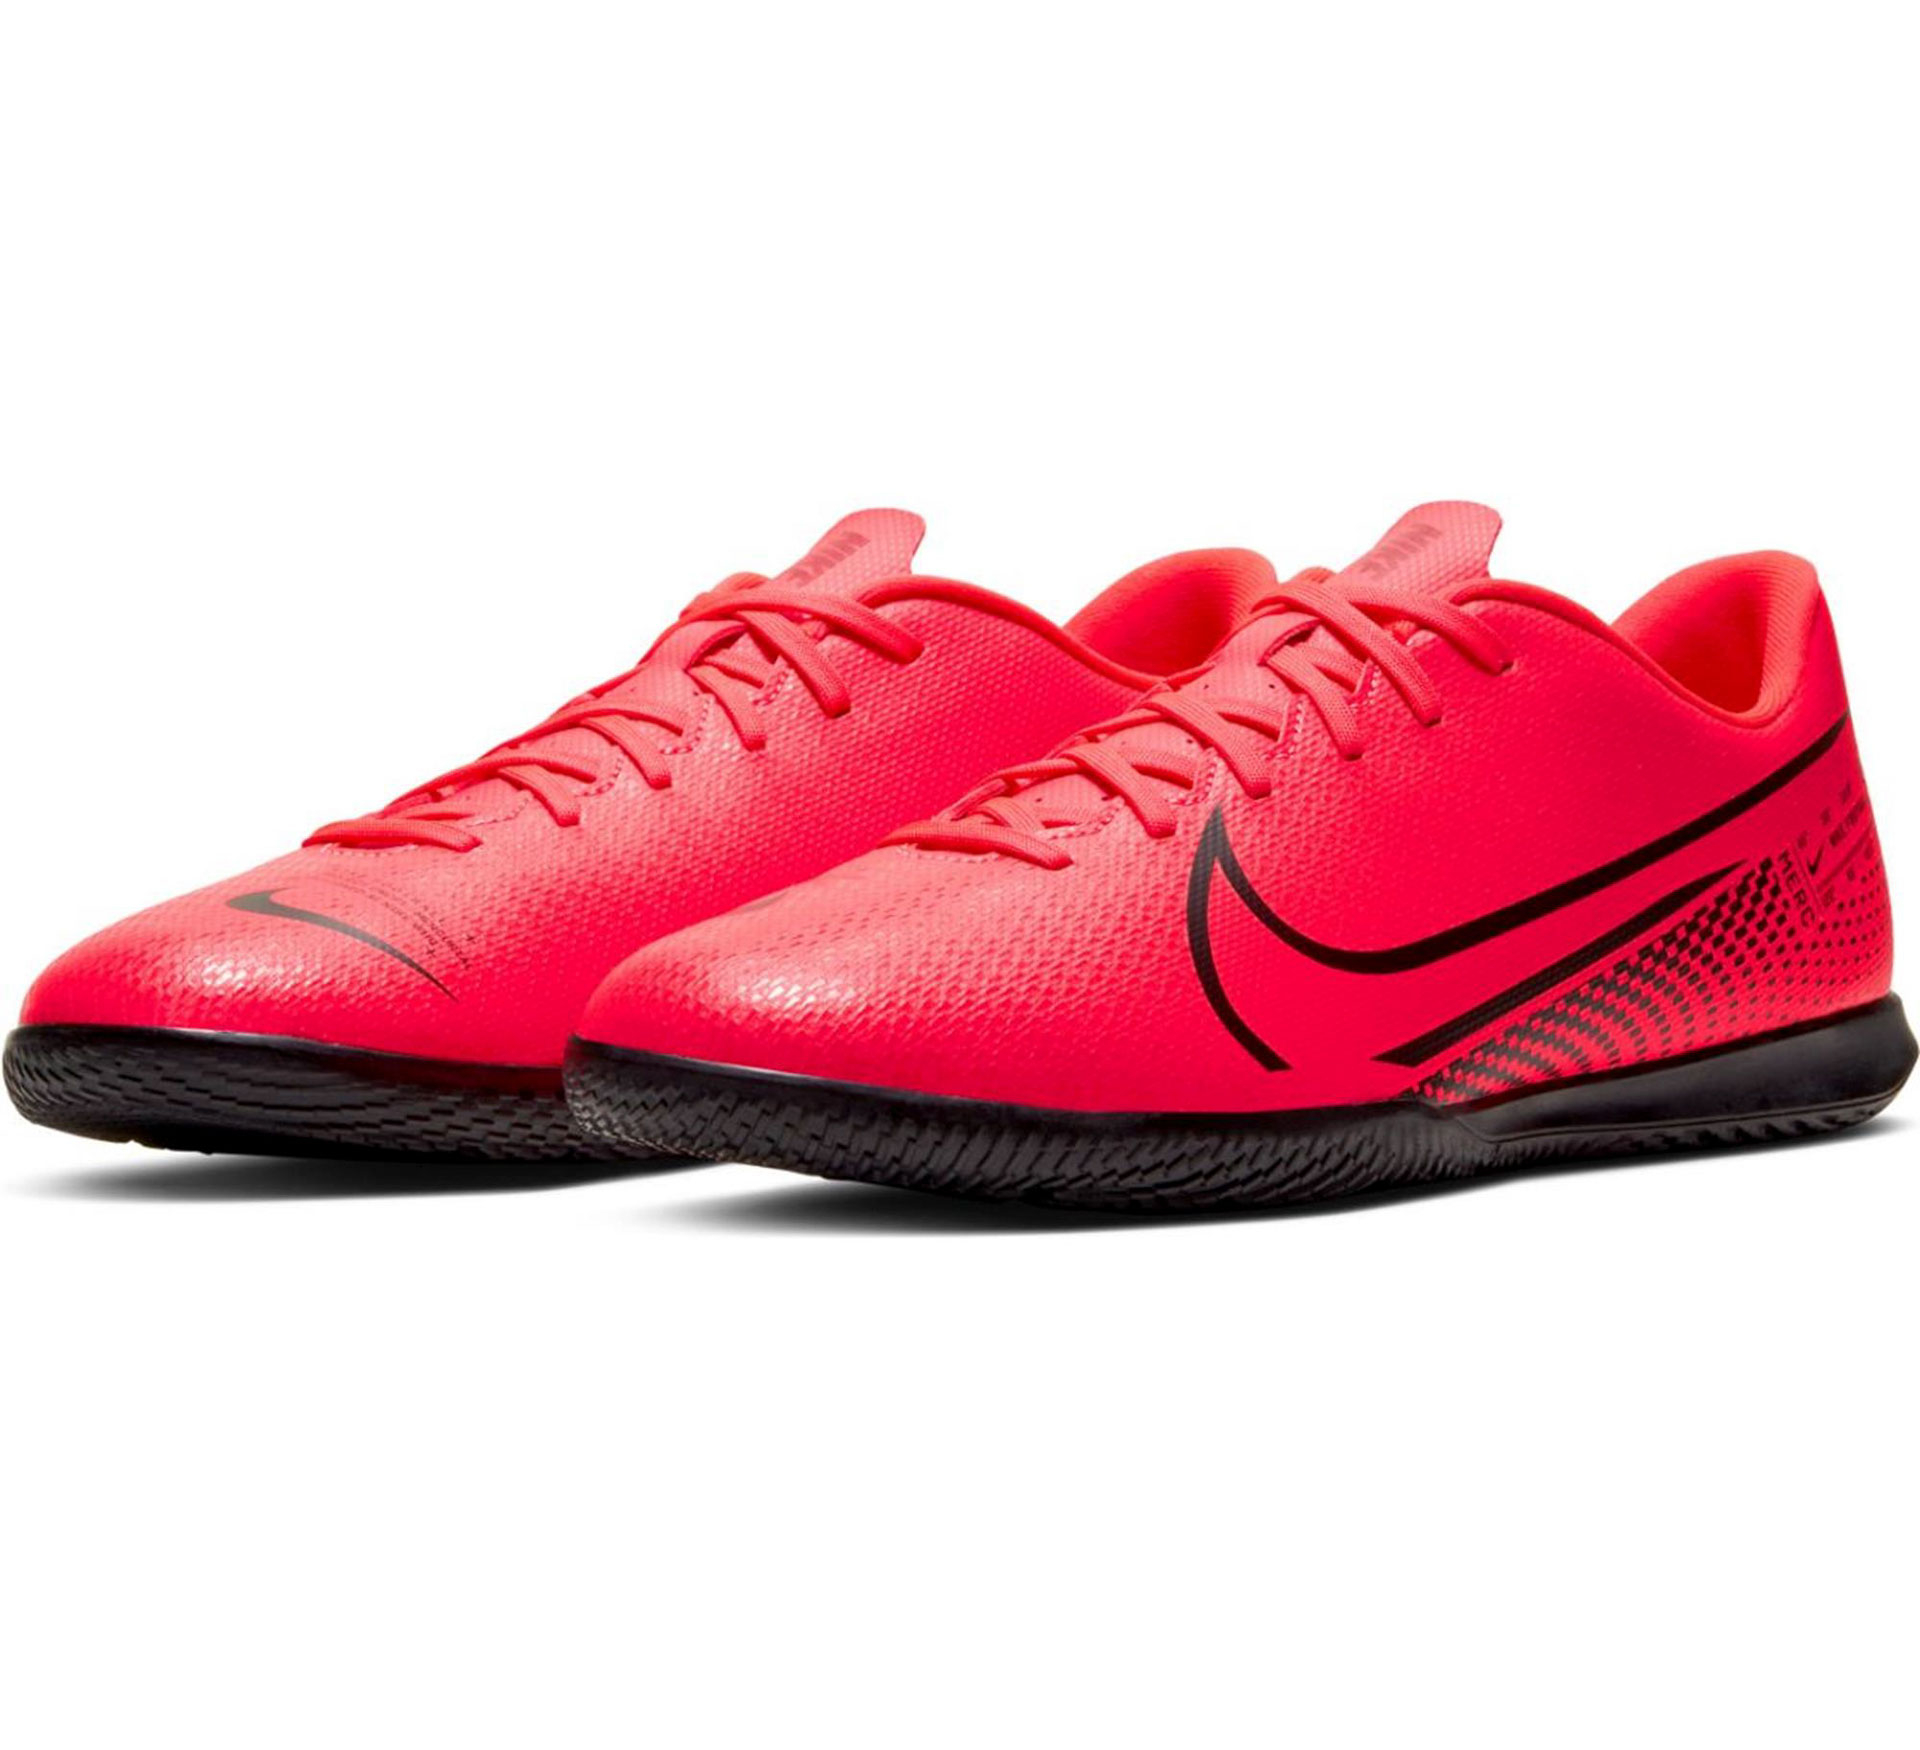 Prominent Glimp zwaard nike zaalvoetbalschoenen rood Today's Deals- OFF-66% >Free Delivery